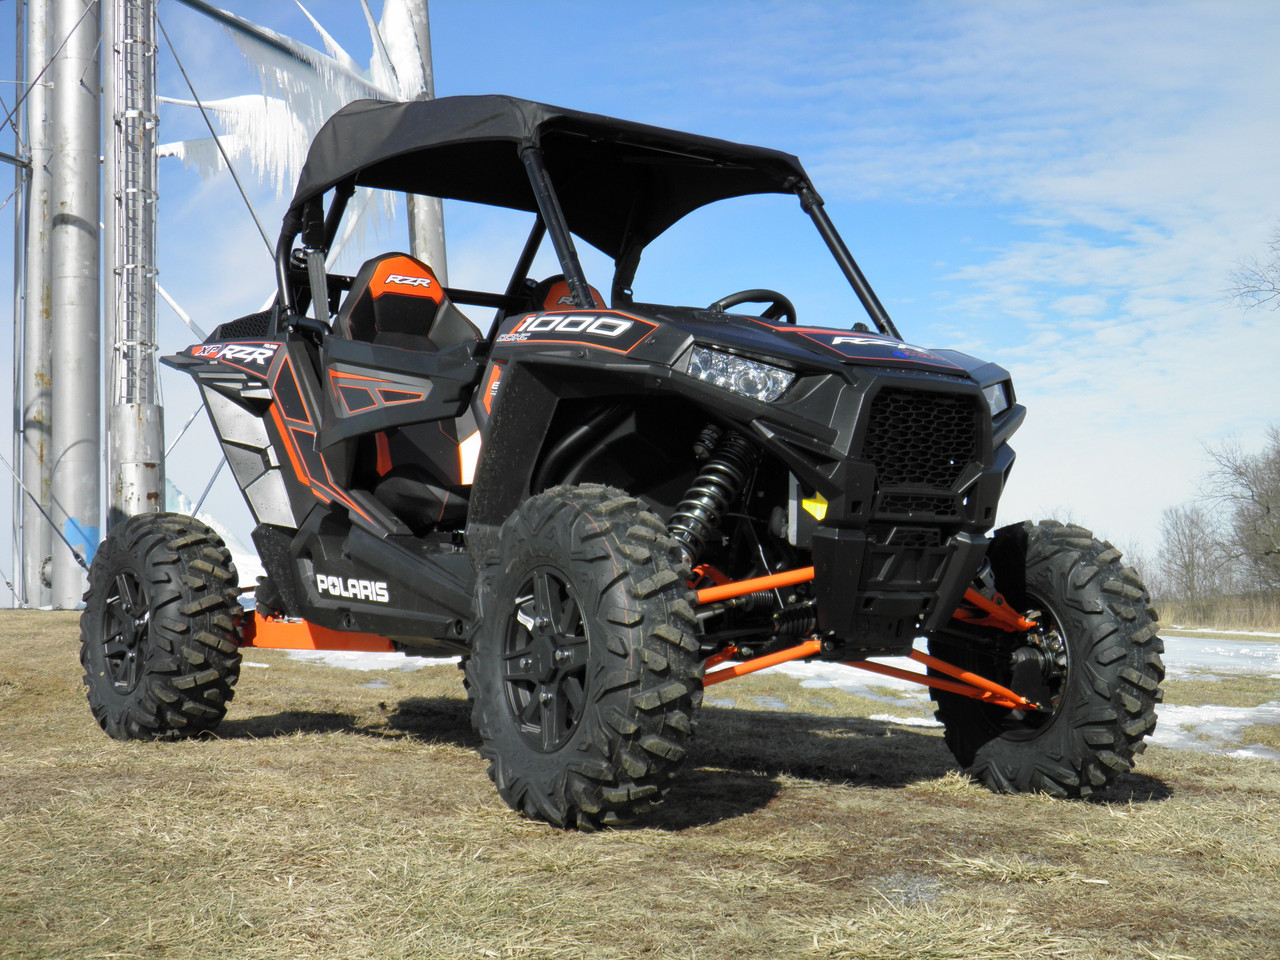 3 Star side x side accessories Polaris RZR XP1000/XP Turbo/S1000 soft top front and side angle view